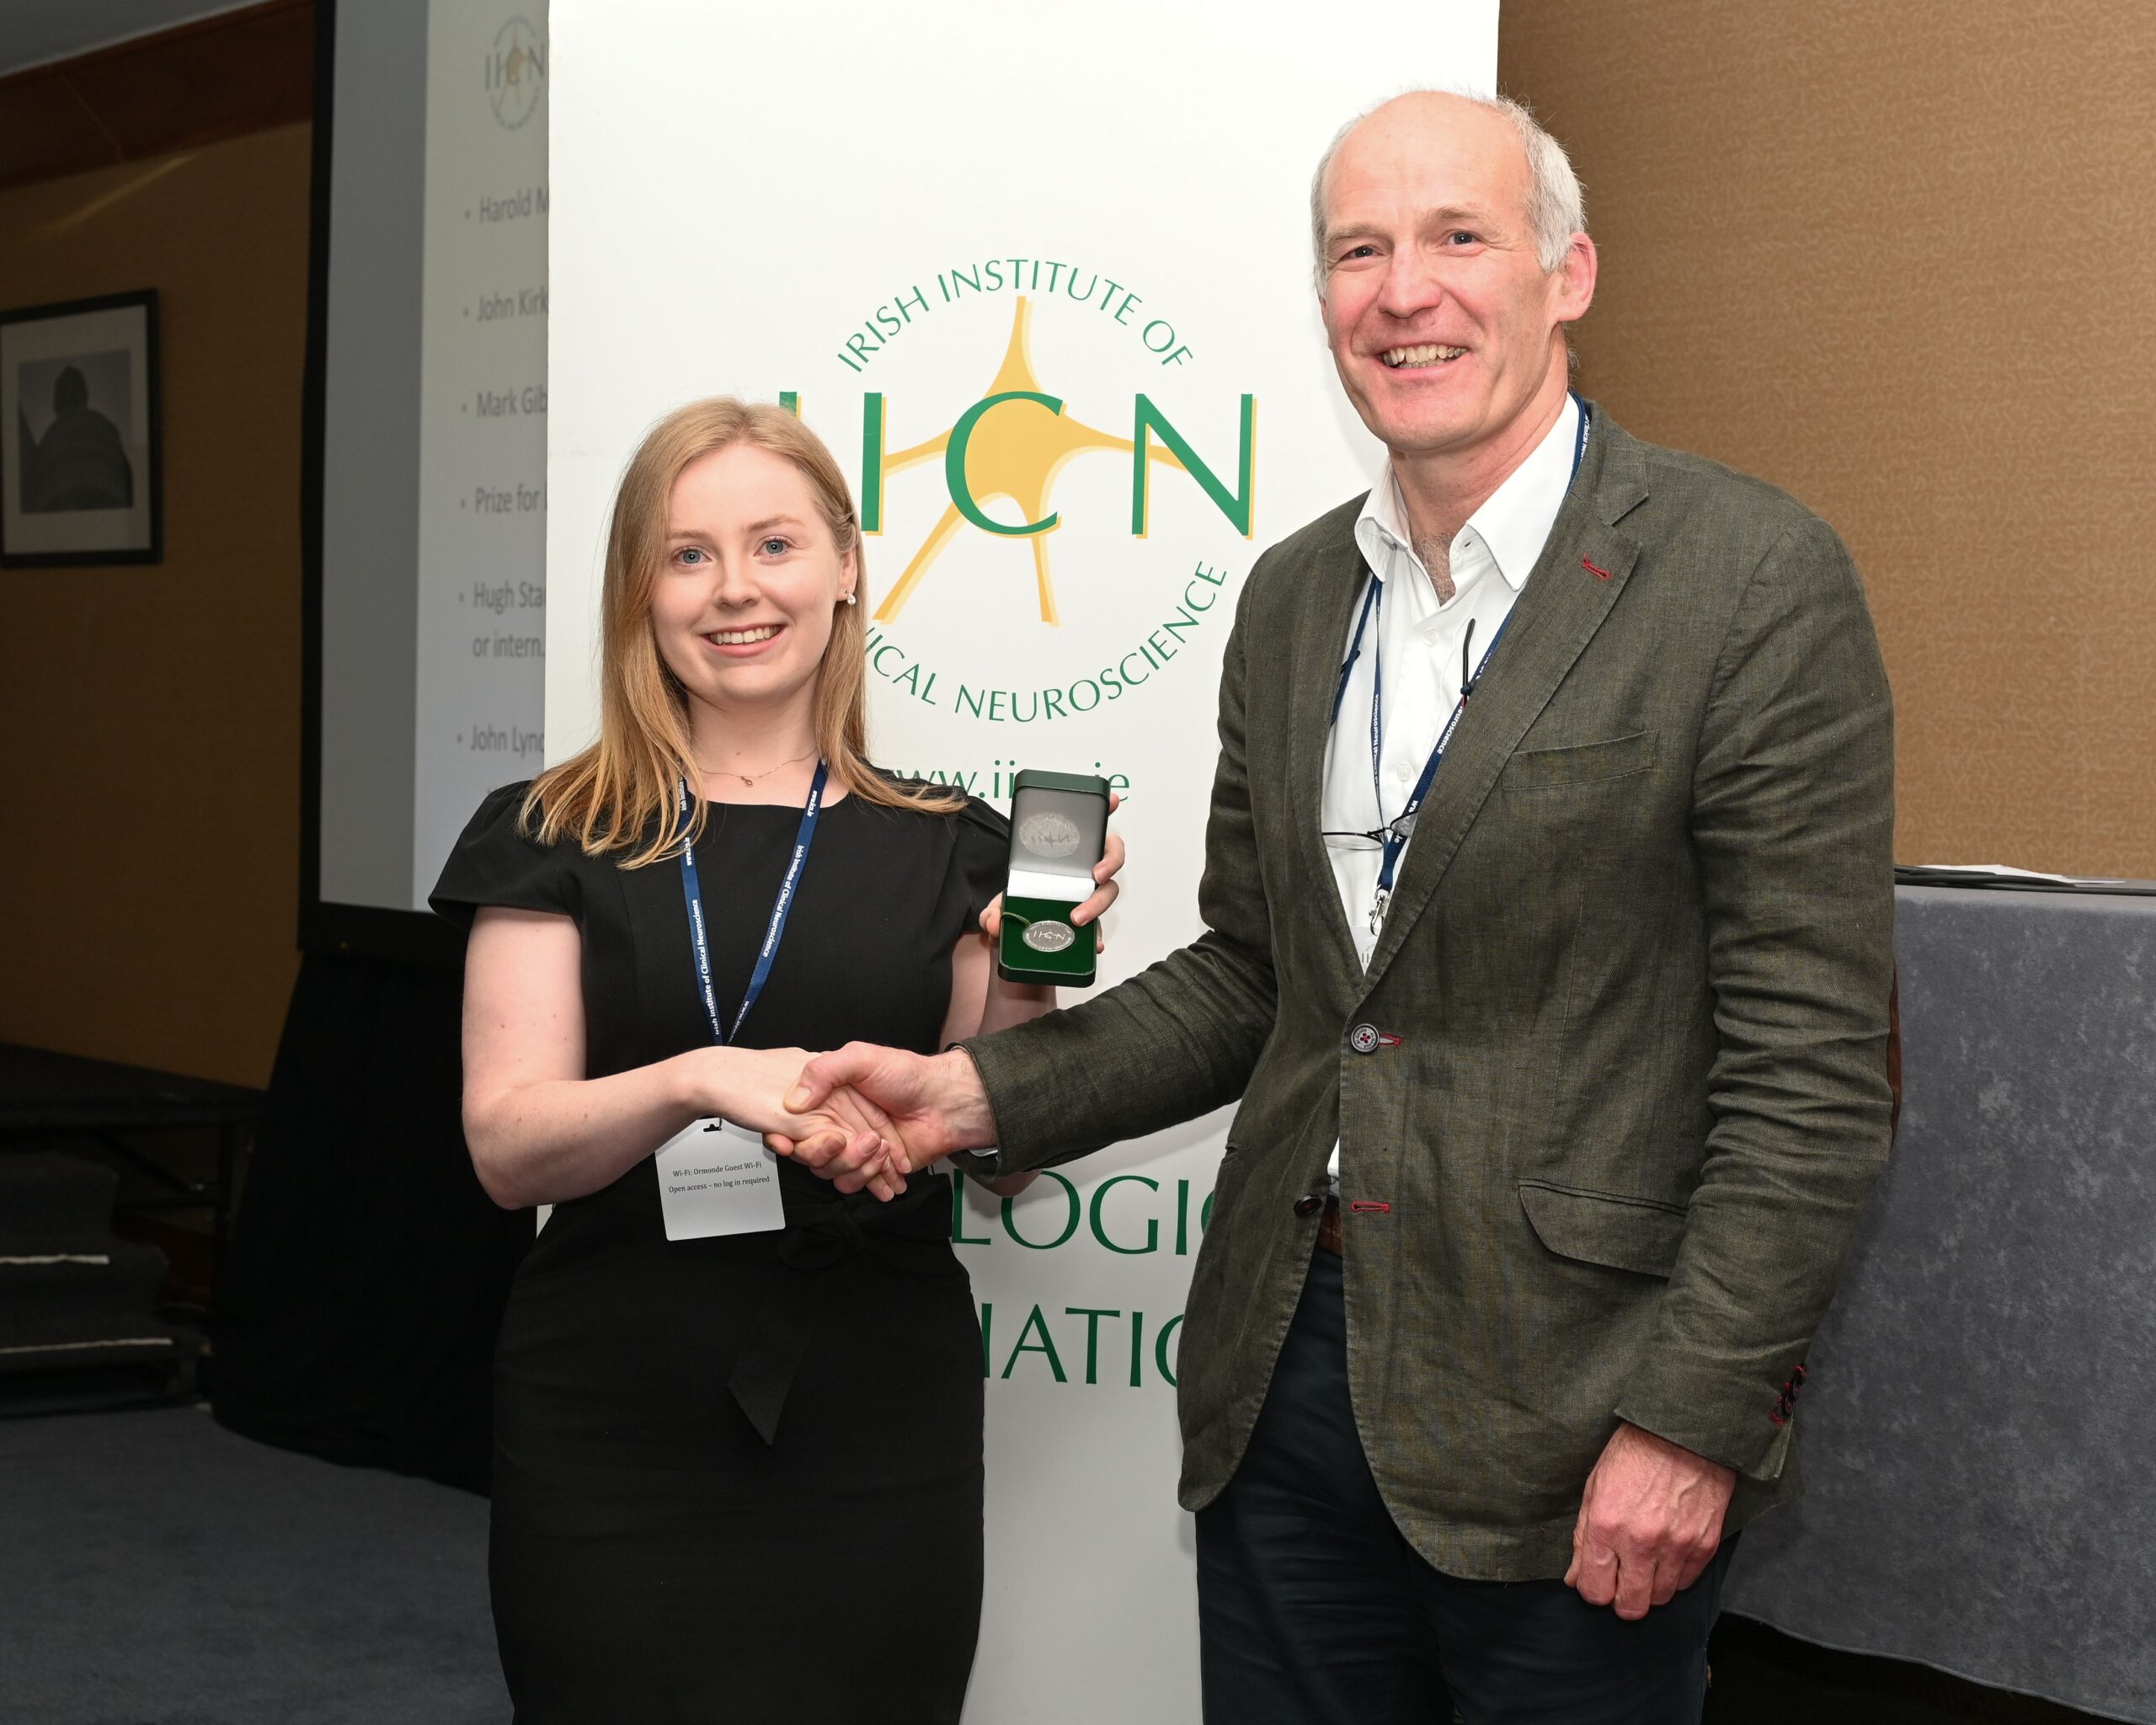 The Hugh Staunton Prize for the best presentation by a medical student or intern was awarded to Dr. Emma Ryder.